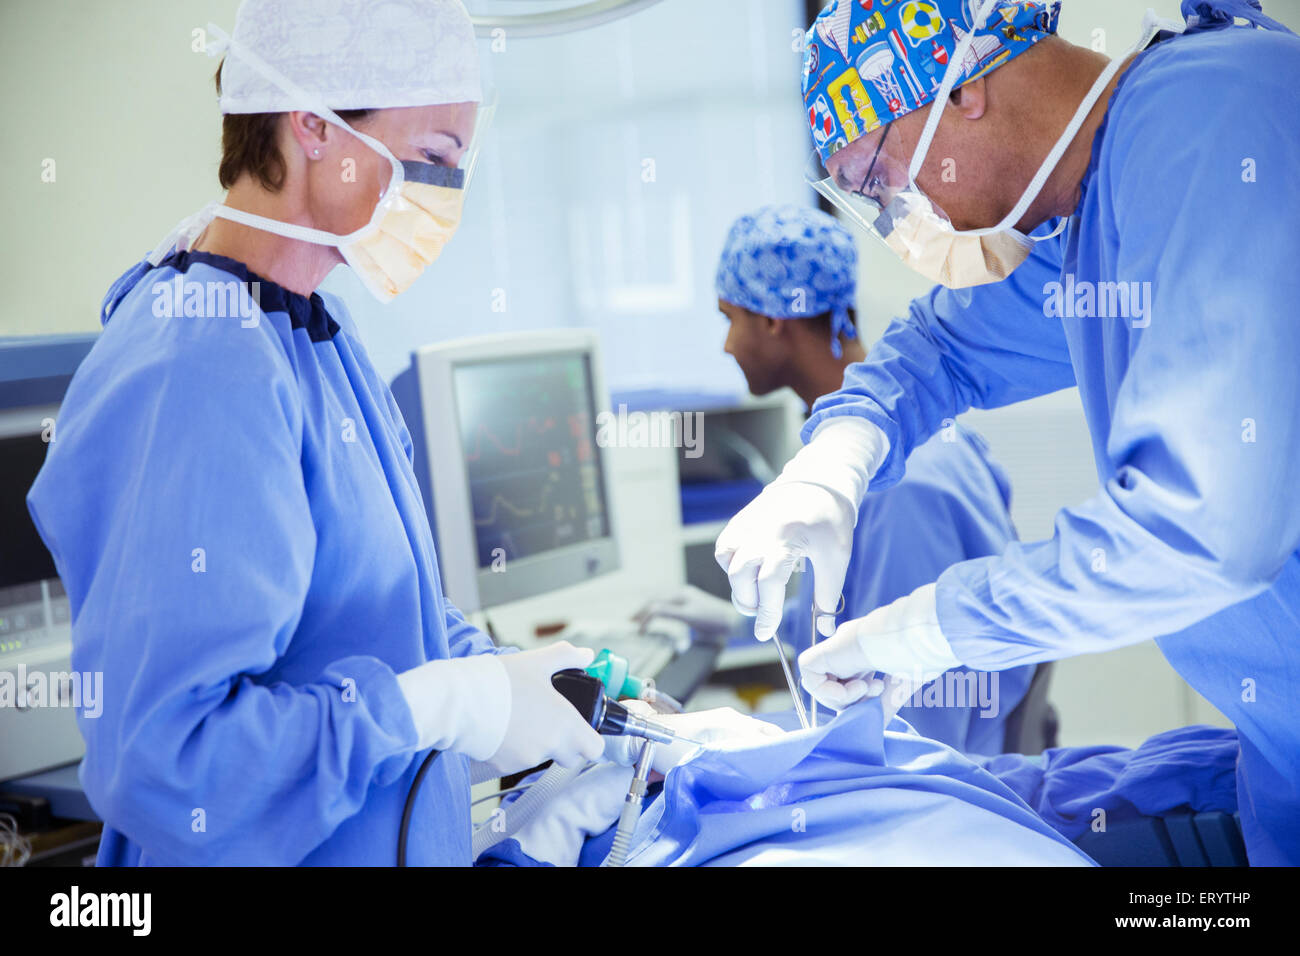 Surgeons performing surgery in operating room Banque D'Images